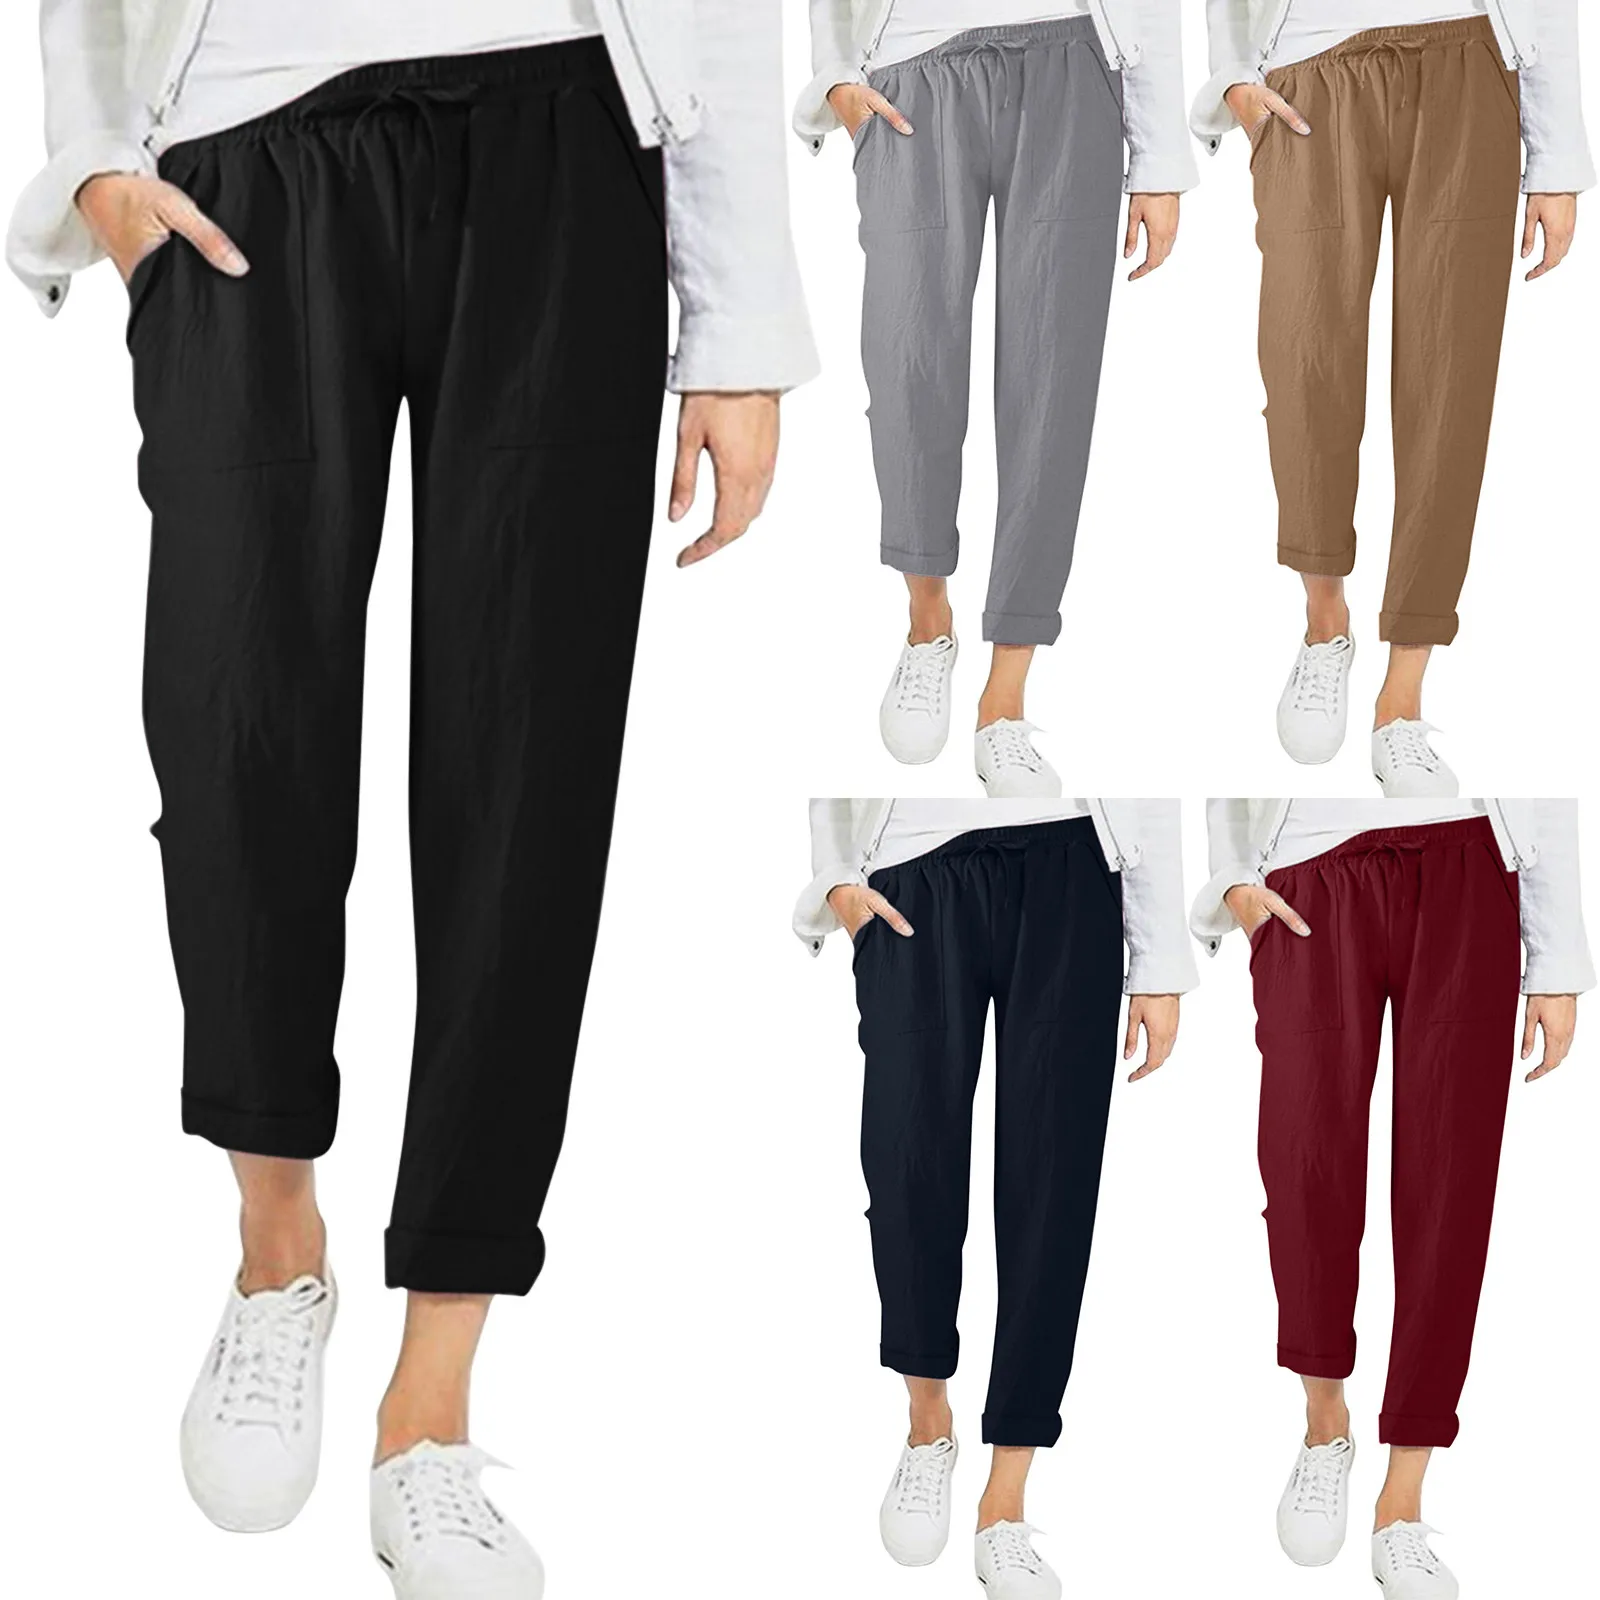 Cotton Linen Pants Women Casual Spring Summer High Waist Elastic Ankle-Length Pants Female Solid Pockets Harem Trousers 2024 women s extra large size pants loose high elastic harem pants middle aged clothing ankle length pants female 7 color trousers